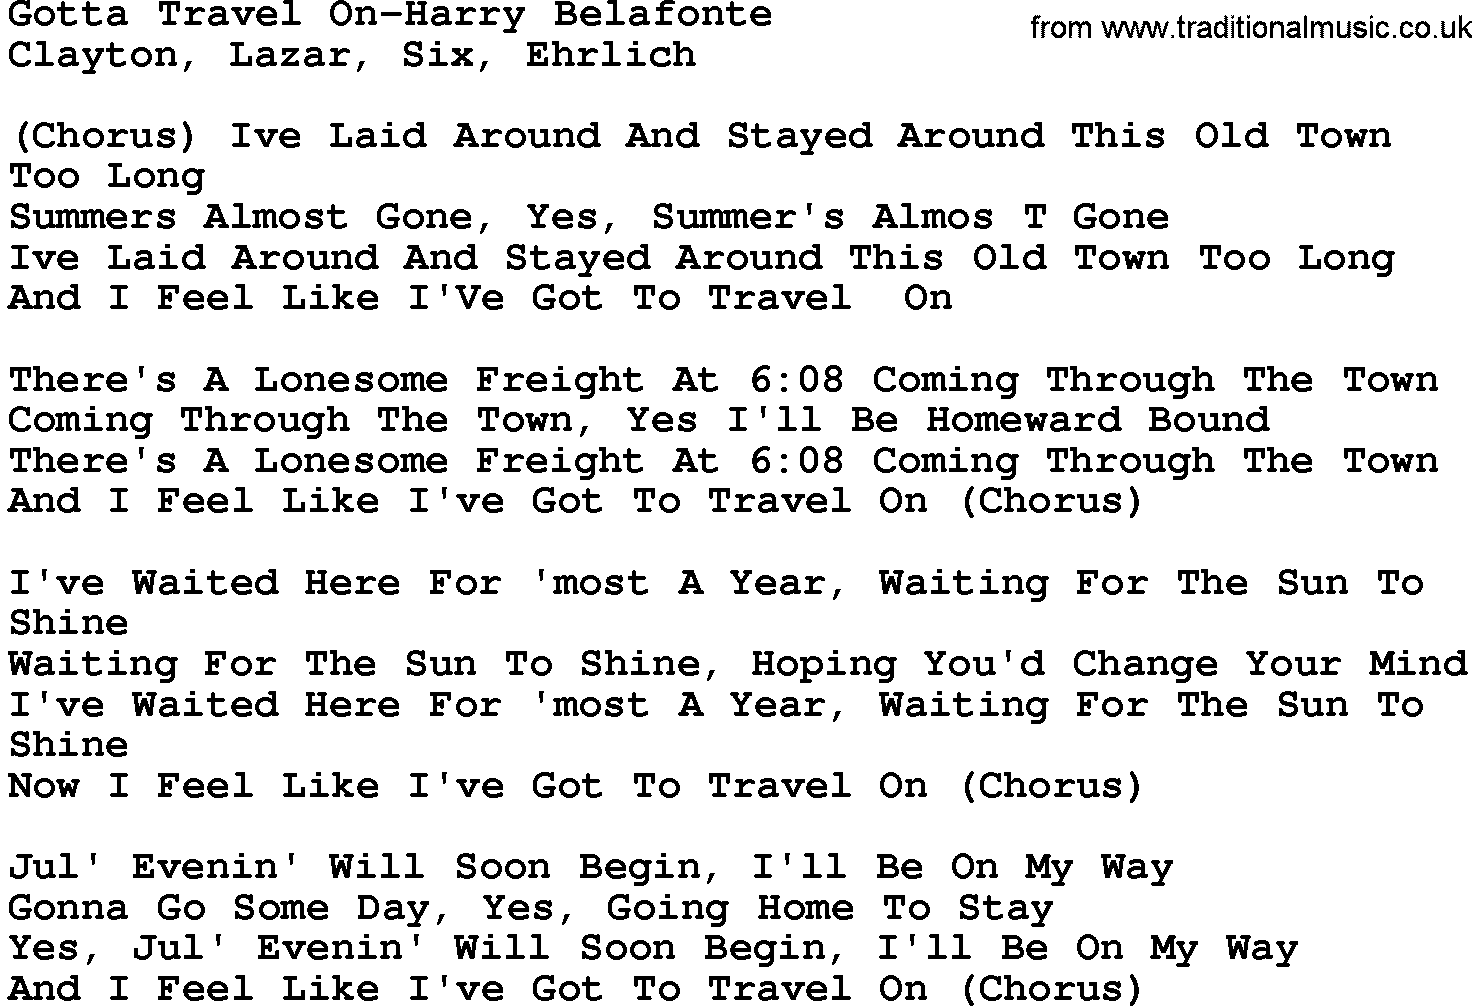 Country music song: Gotta Travel On-Harry Belafonte lyrics and chords